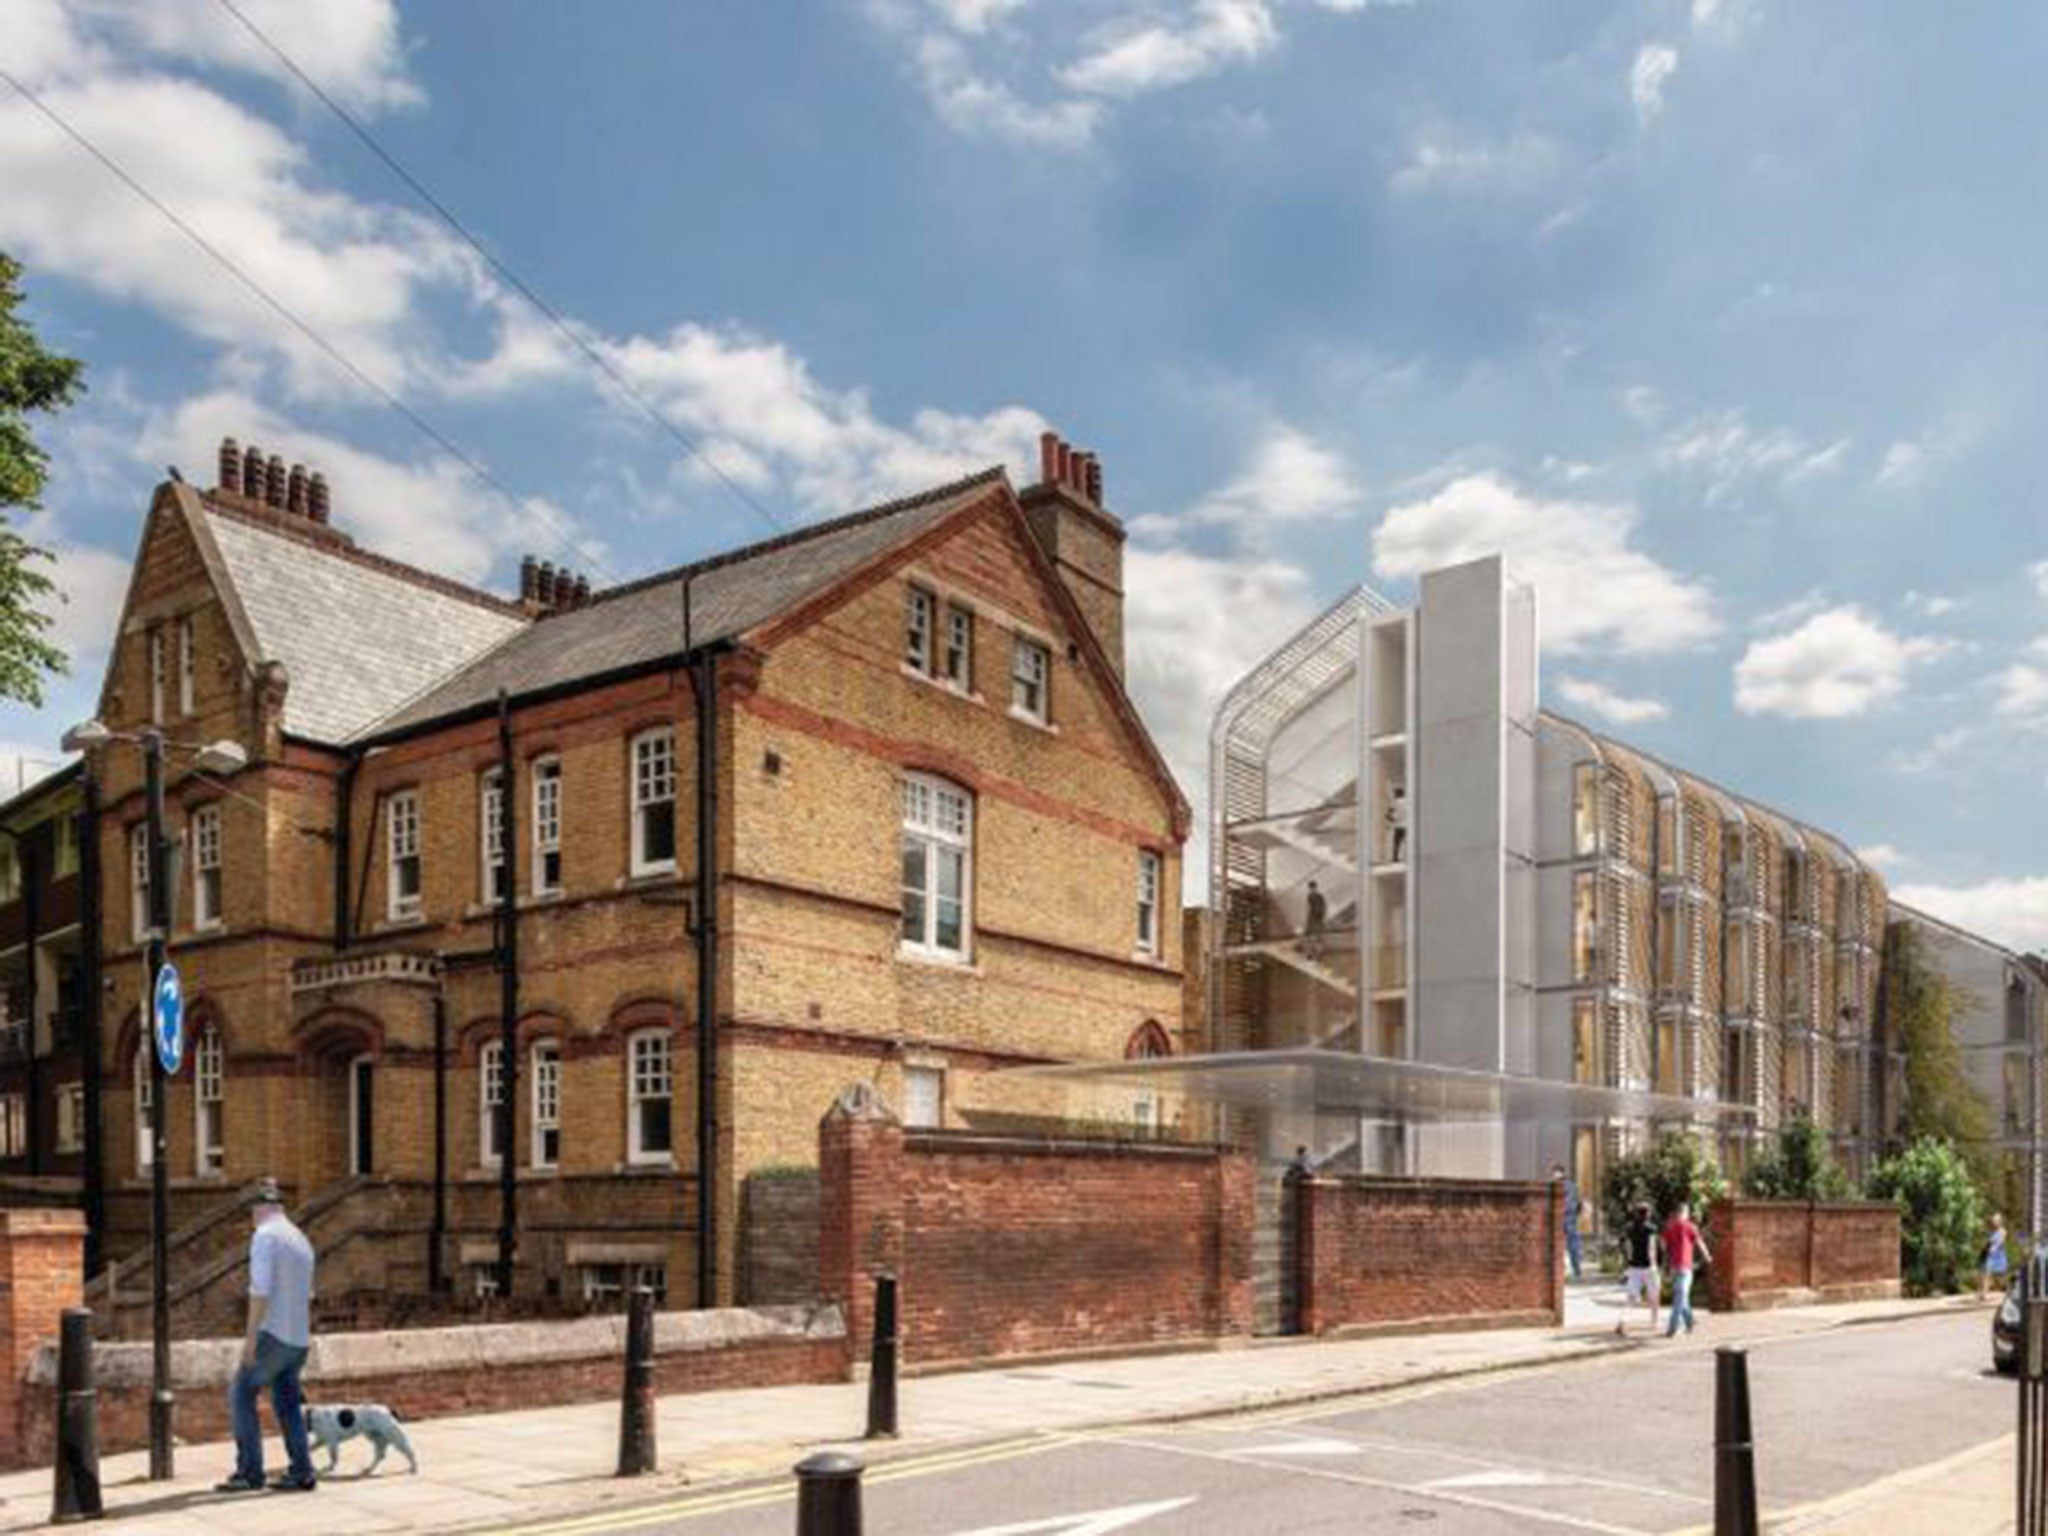 Plans to develop New Belvedere House have already been approved